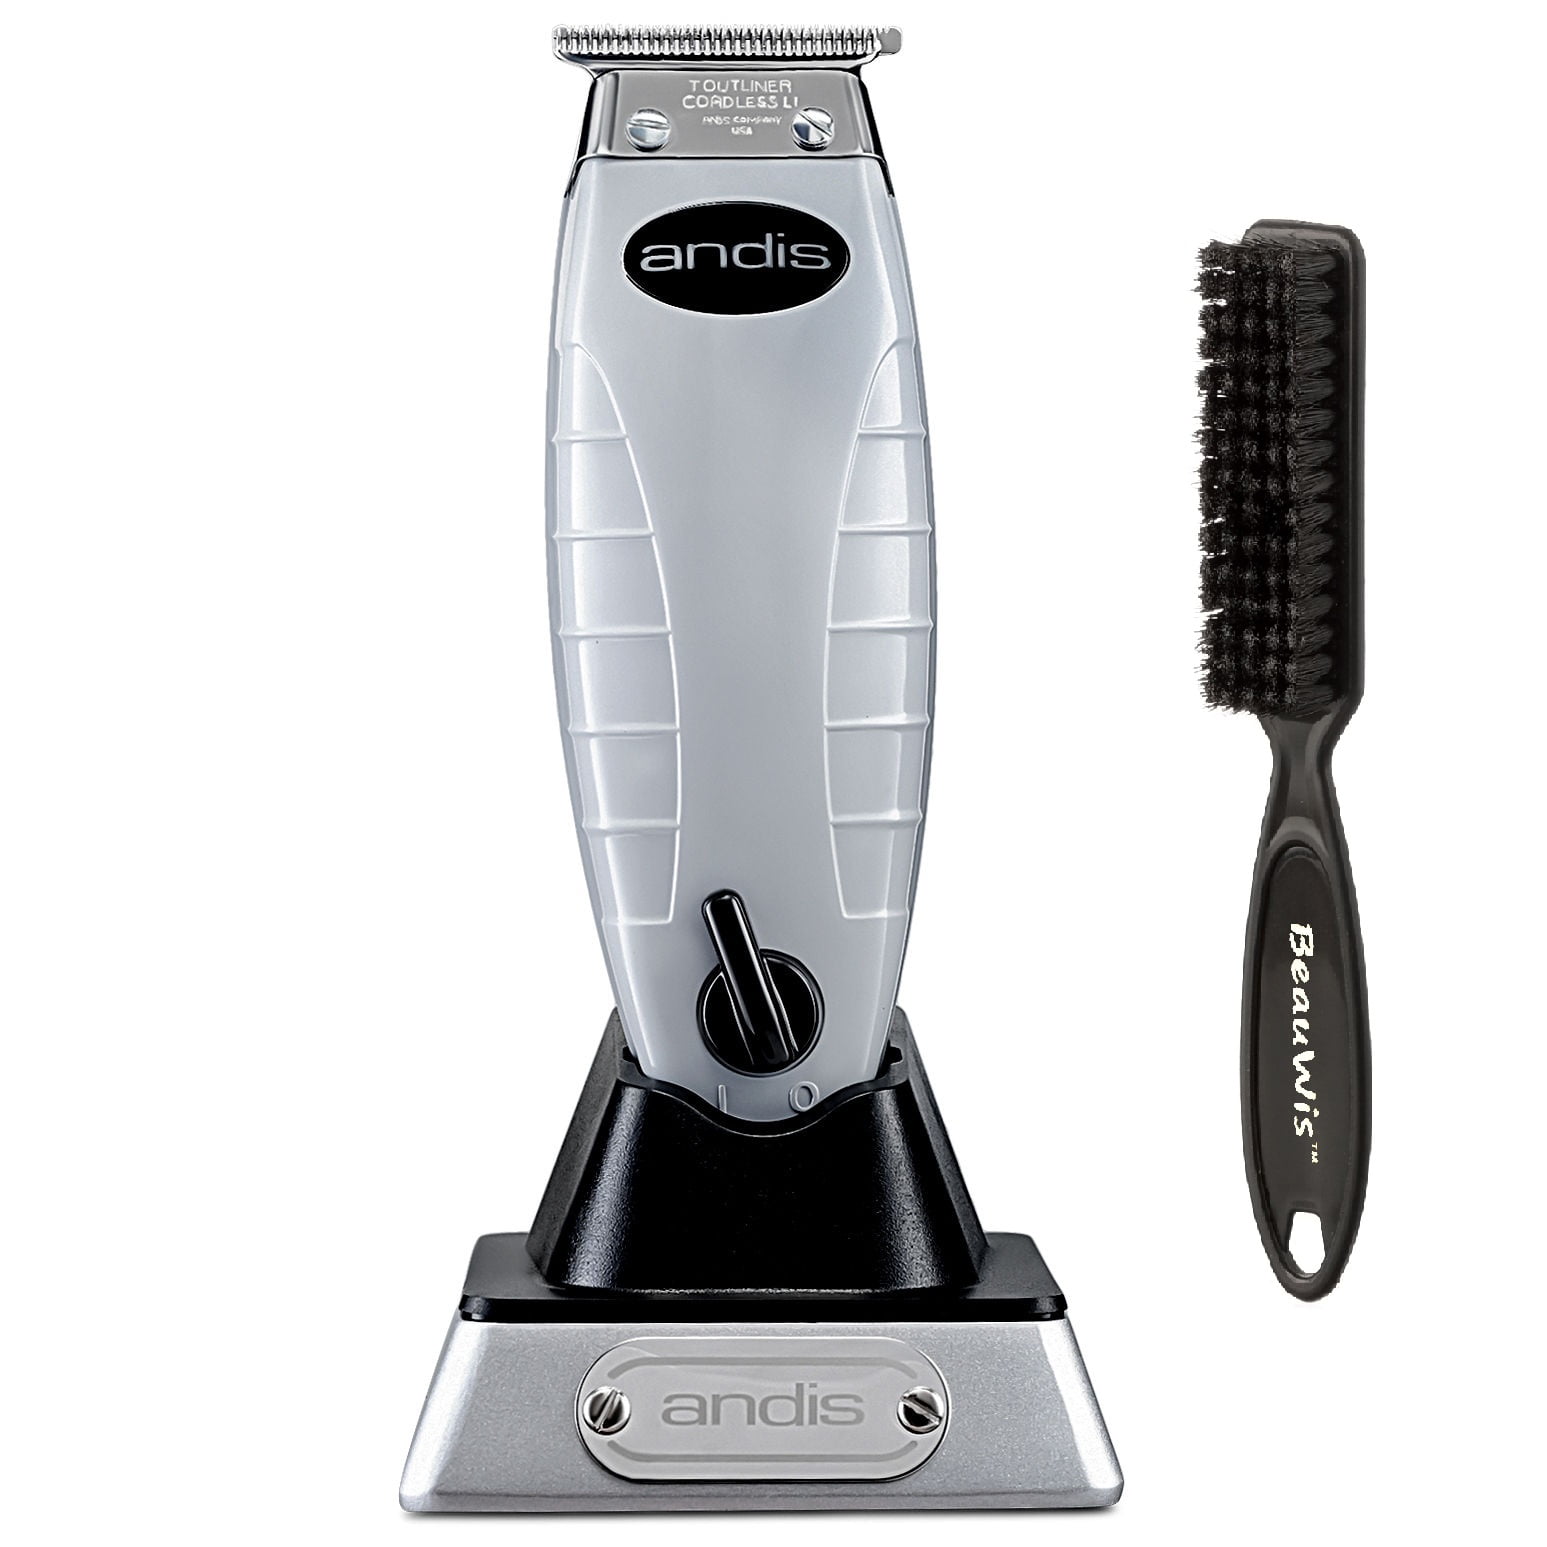 Andis-Cordless-T-Outliner-Trimmer-with-BeauWis-Blade-Brush_a2024a25-591b-4f41-bcd9-143457fa7ce0.df3aeb270c1ef5bbb181e3d2609a5c21.jpeg